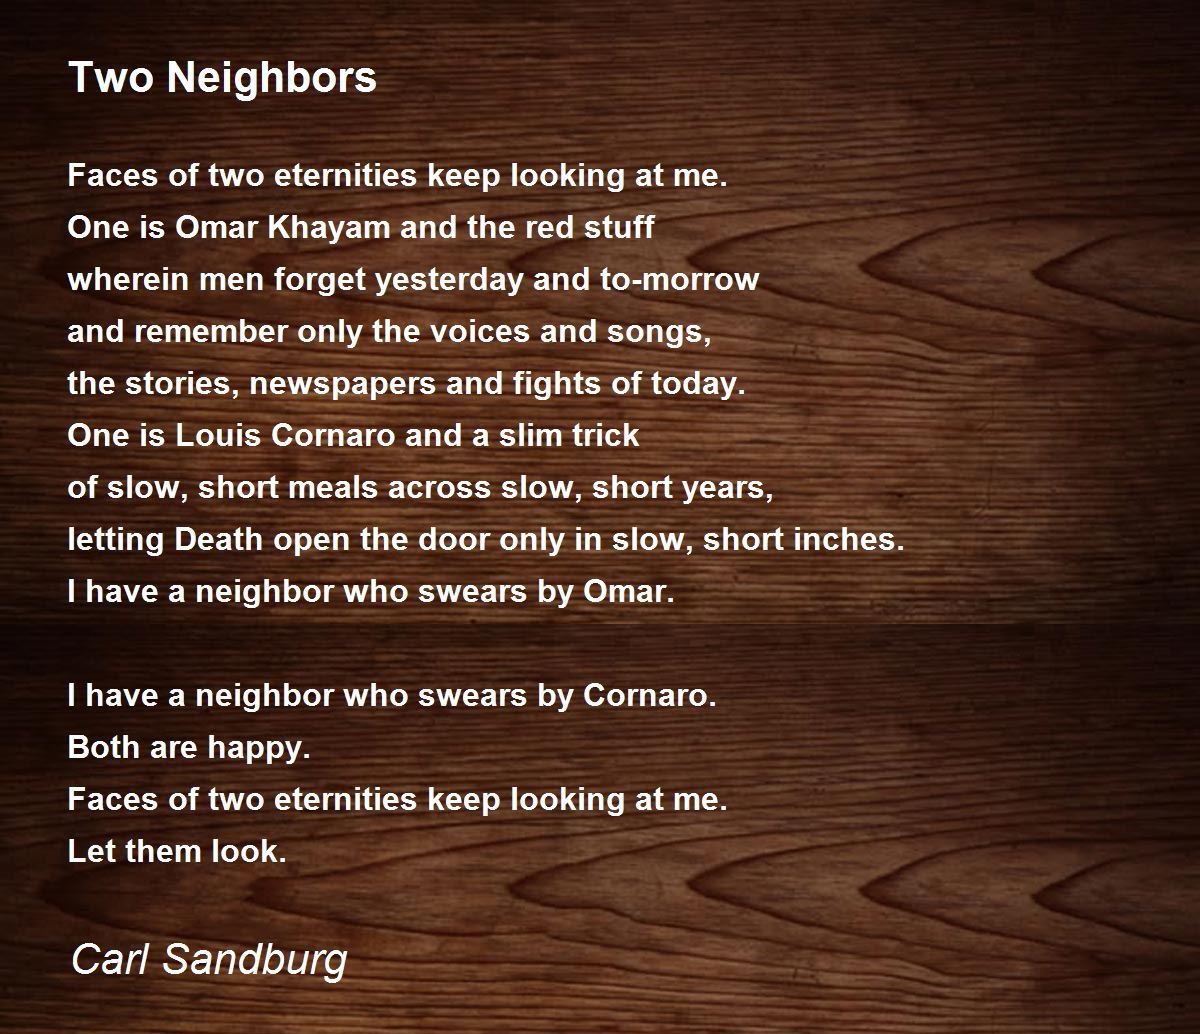 What are some poems about neighbors?